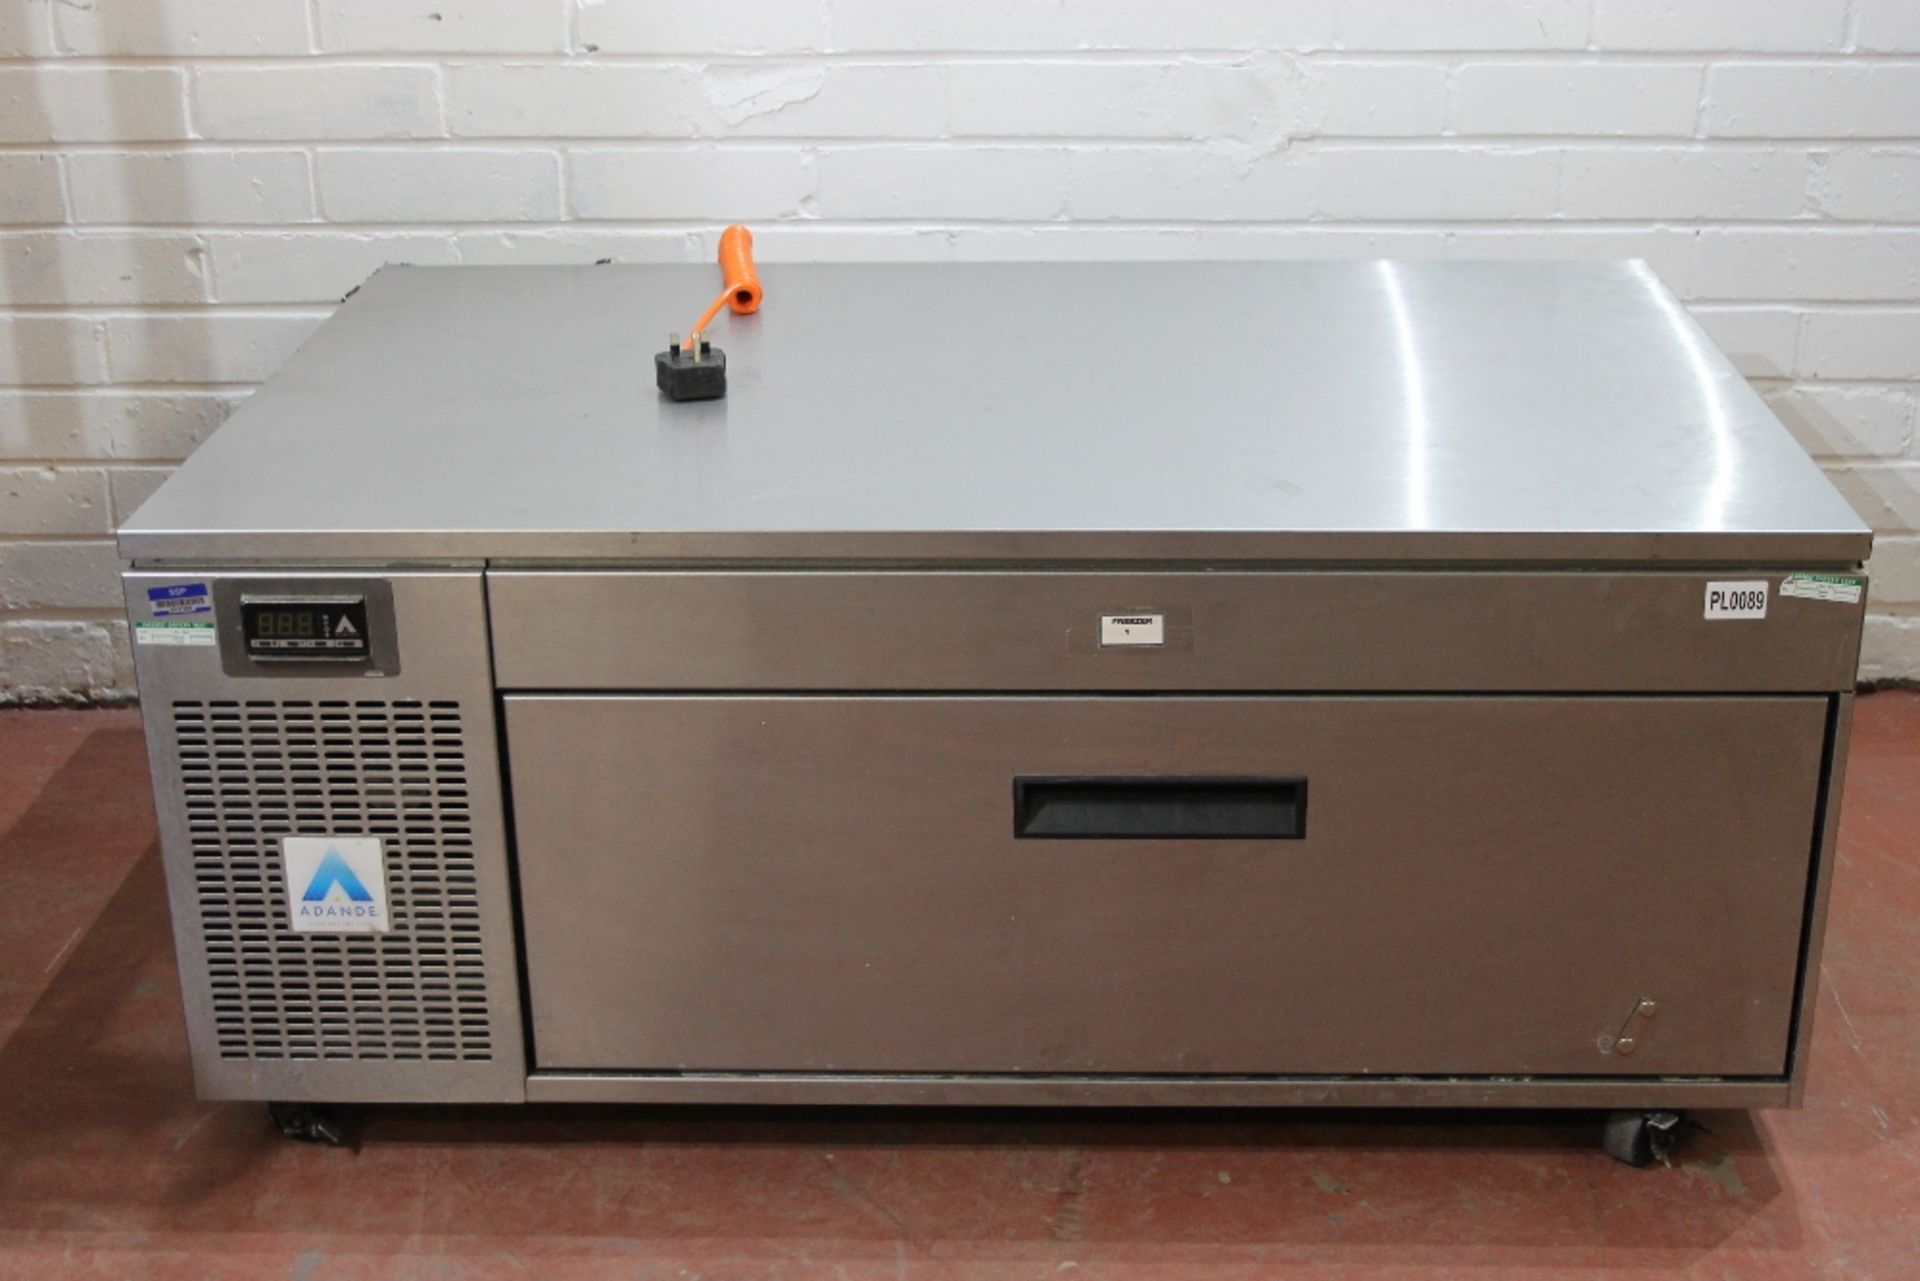 Adande Stainless Steel Freezer Drawer -S/N SP3788P W110cm x H48cm x D70cm - 1ph- Tested Working NO - Image 2 of 2